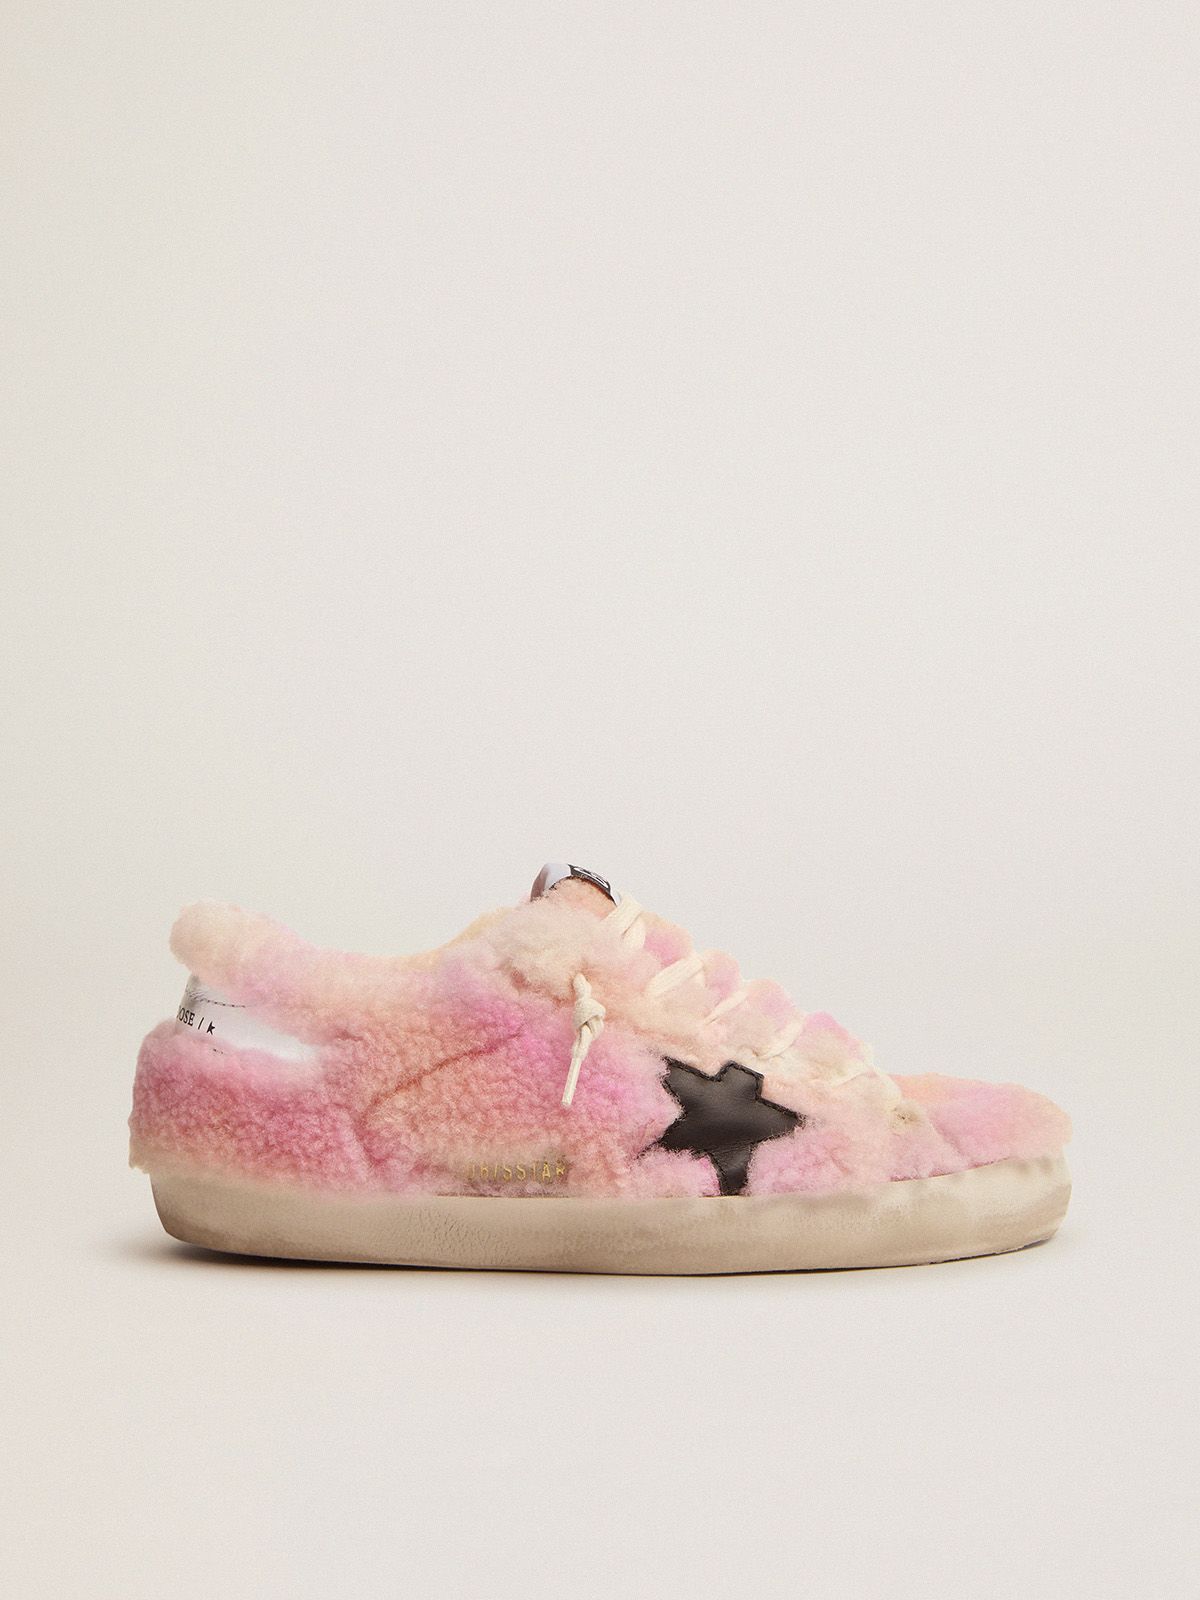 golden goose and in with Super-Star pink upper tie-dye shearling lining sneakers